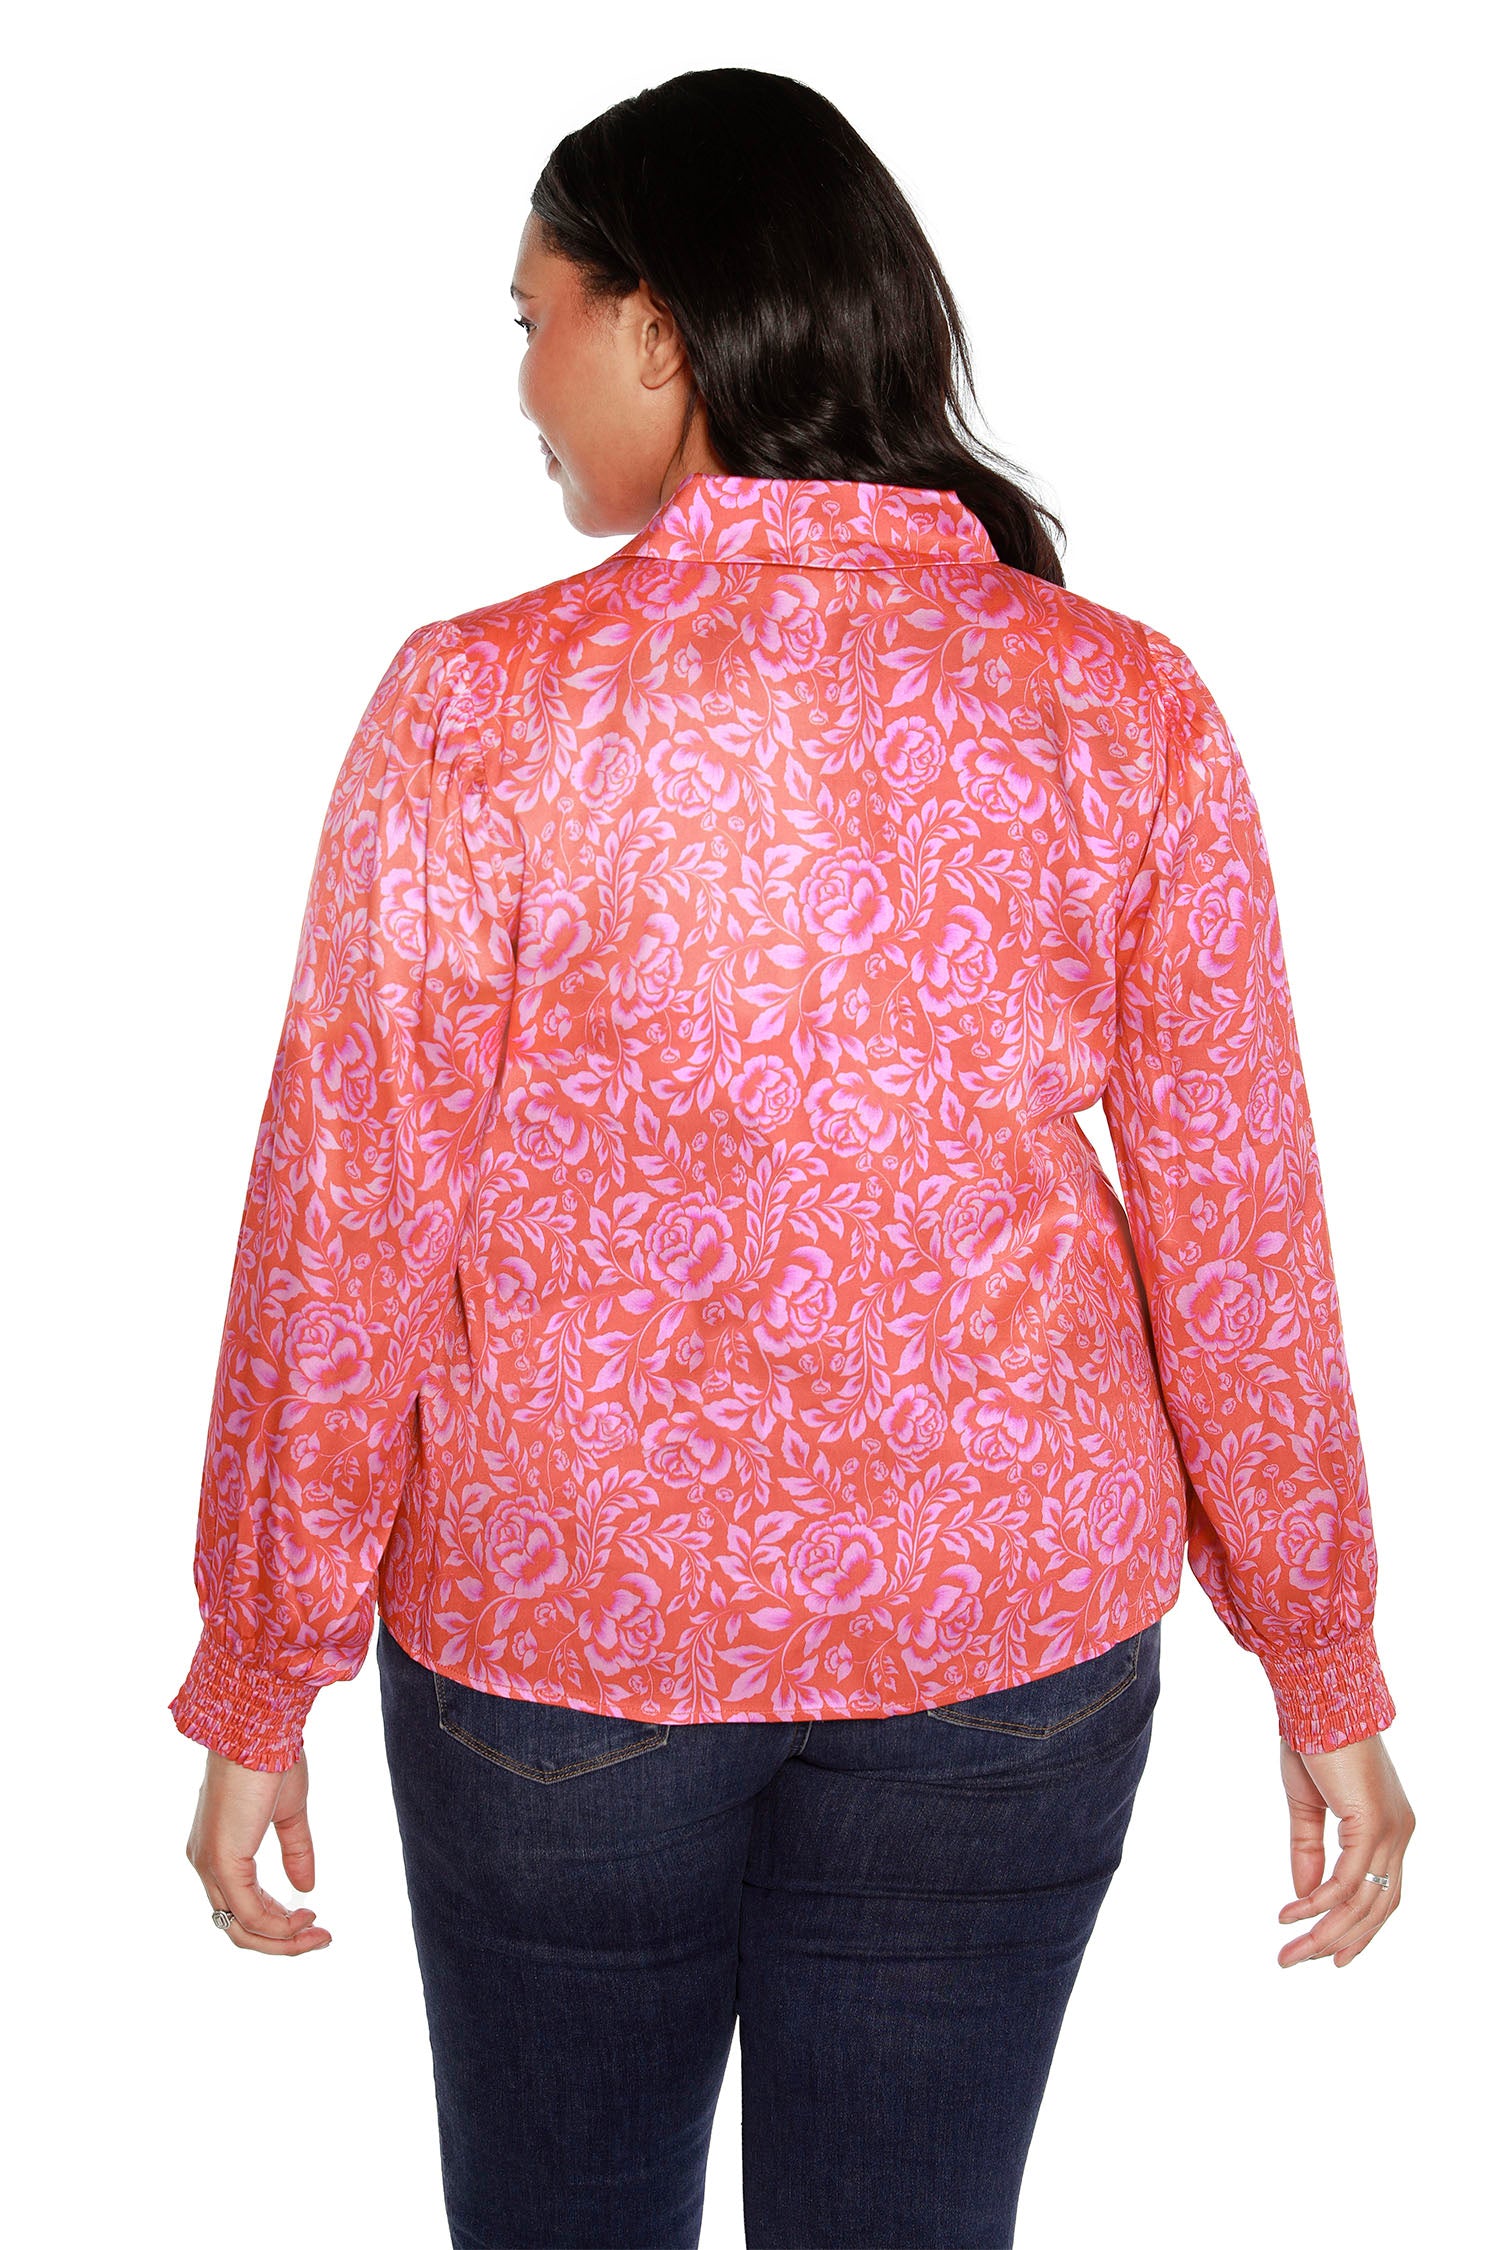 Women’s Floral Printed Button Front Shirt with Bishop Sleeves | Curvy